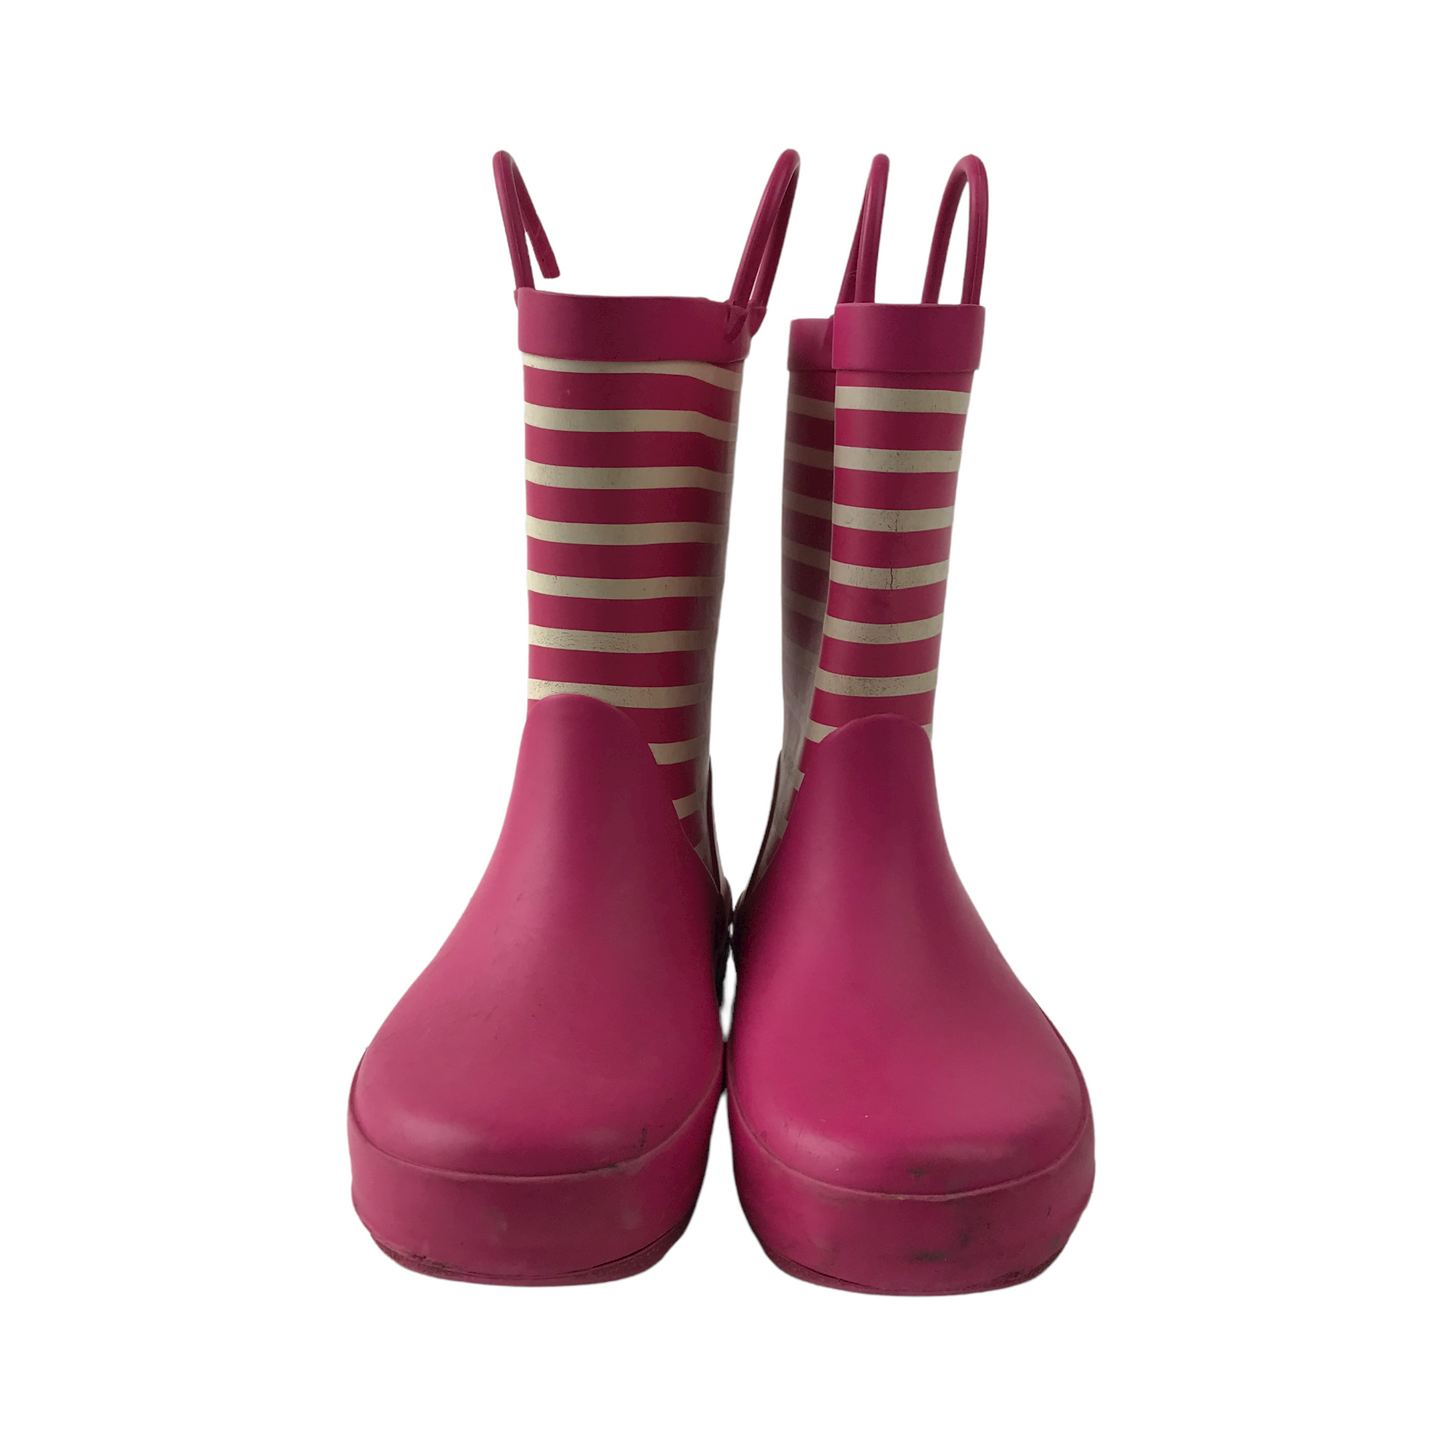 M&S Pink and White Stripy Wellies Shoe Size 11 (jr)